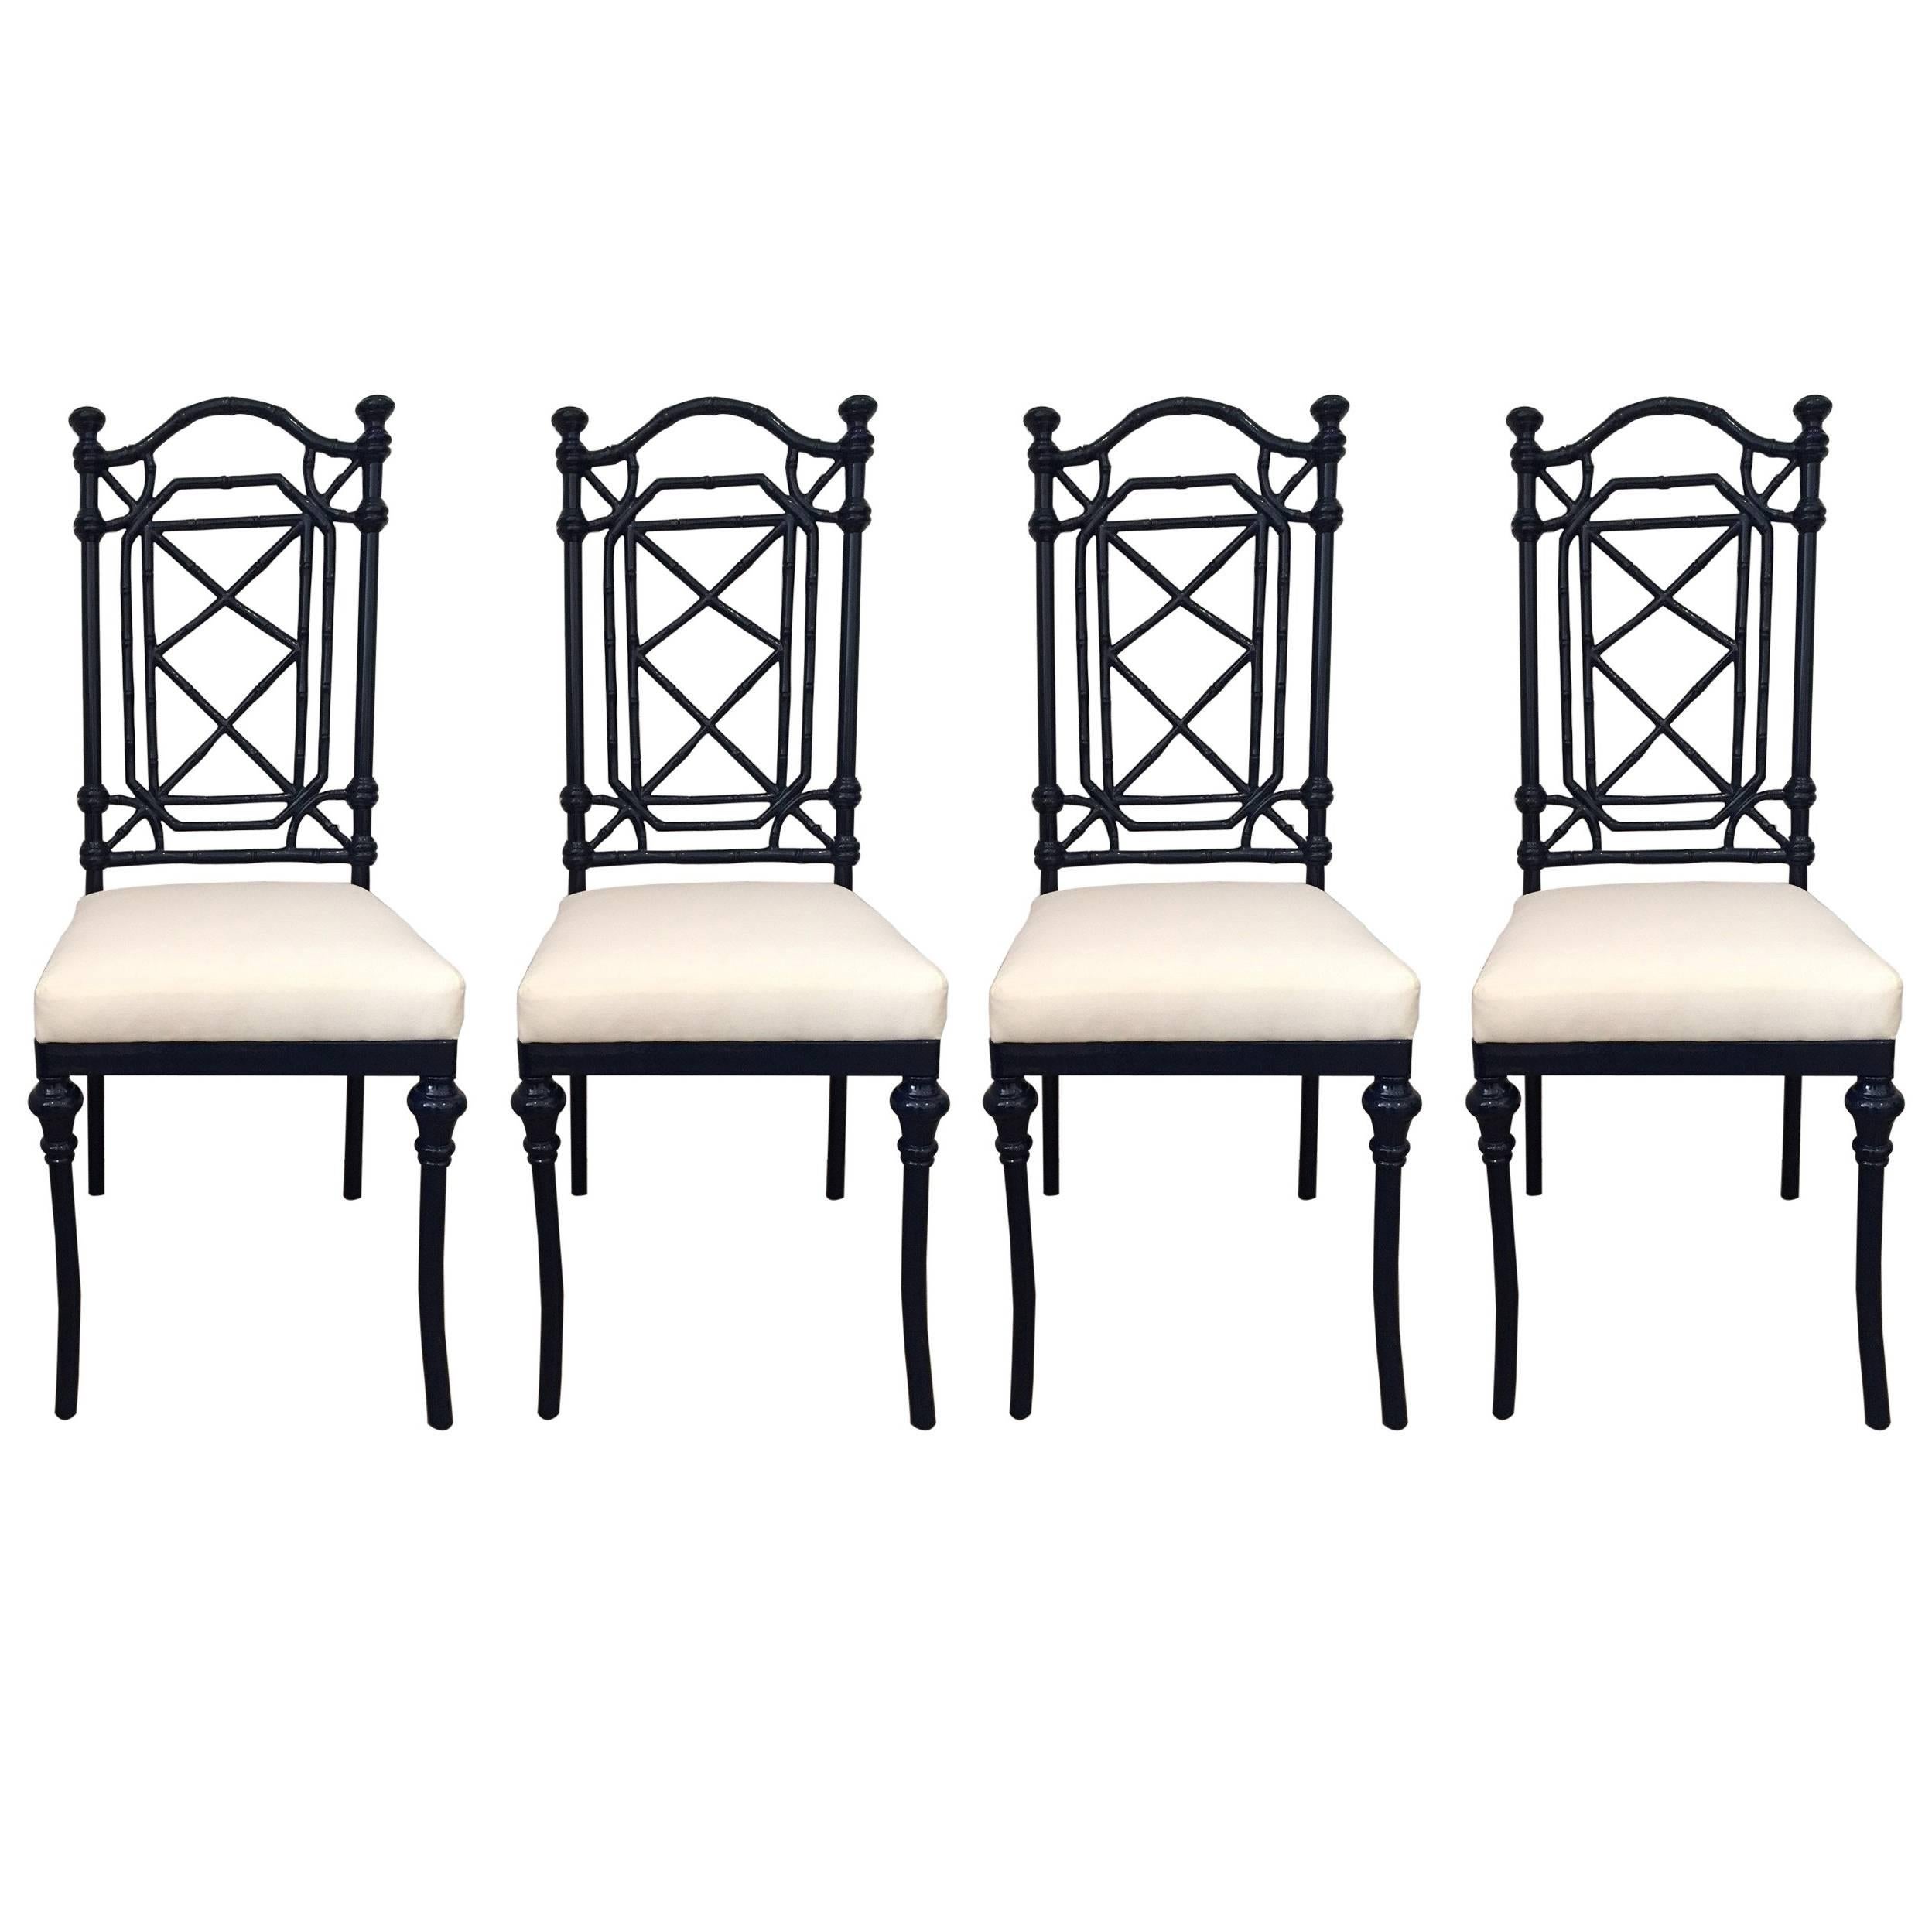 20th Century Chinese Chippendale-Style Dining Chairs - In/Outdoor - Set of Four